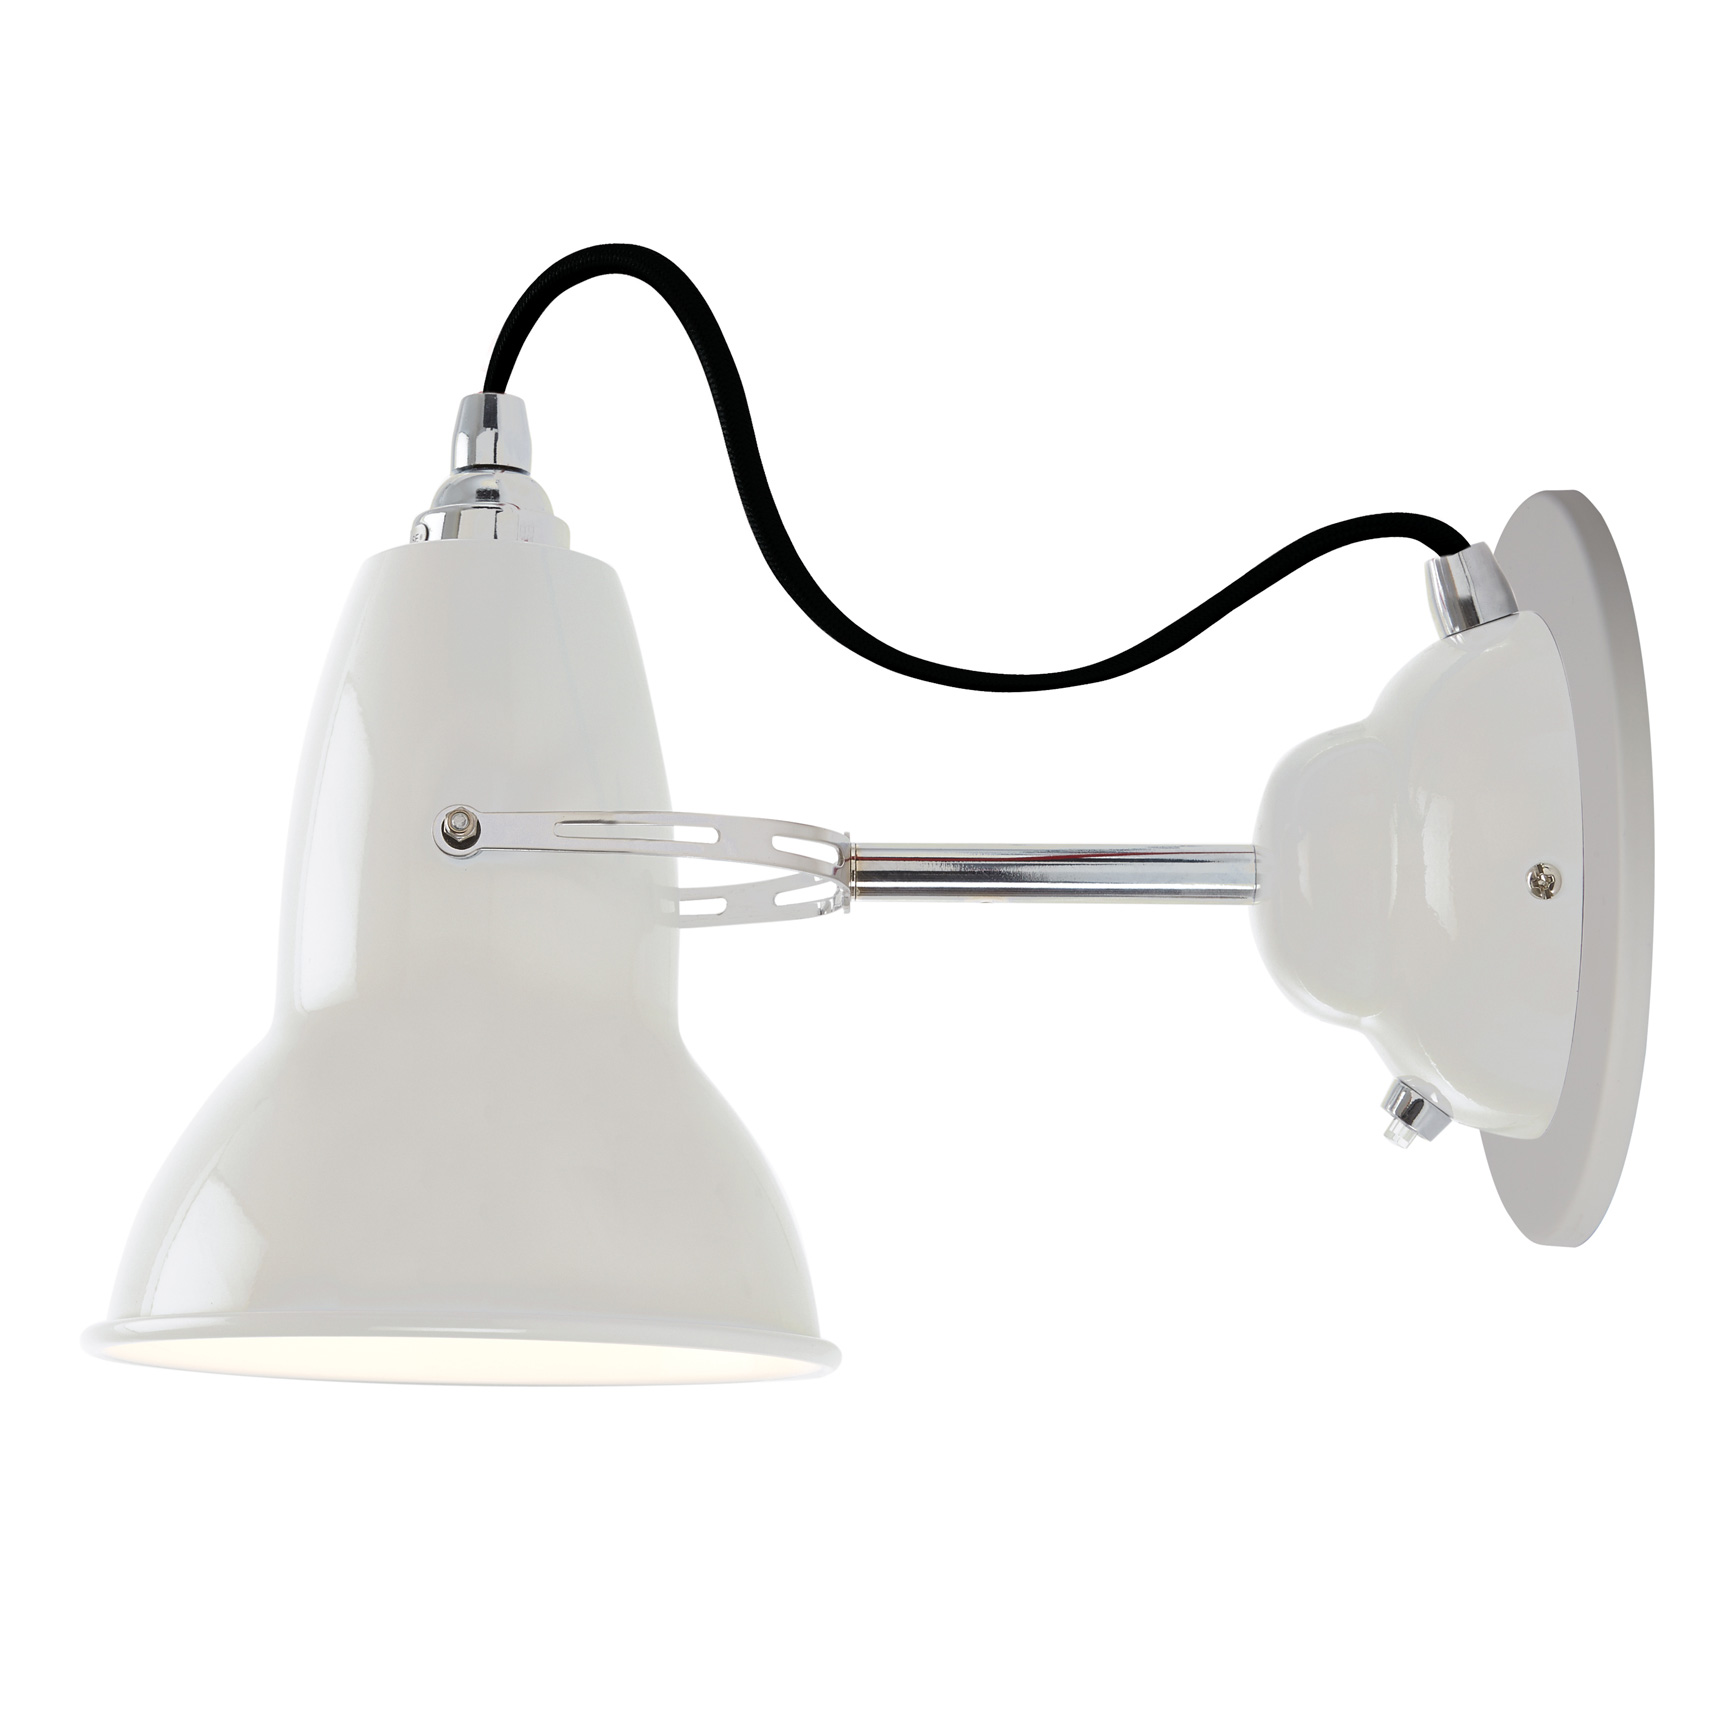 Bright Chrome Original 1227 Wall Mounted Lamp (LED, Non-Dimmable